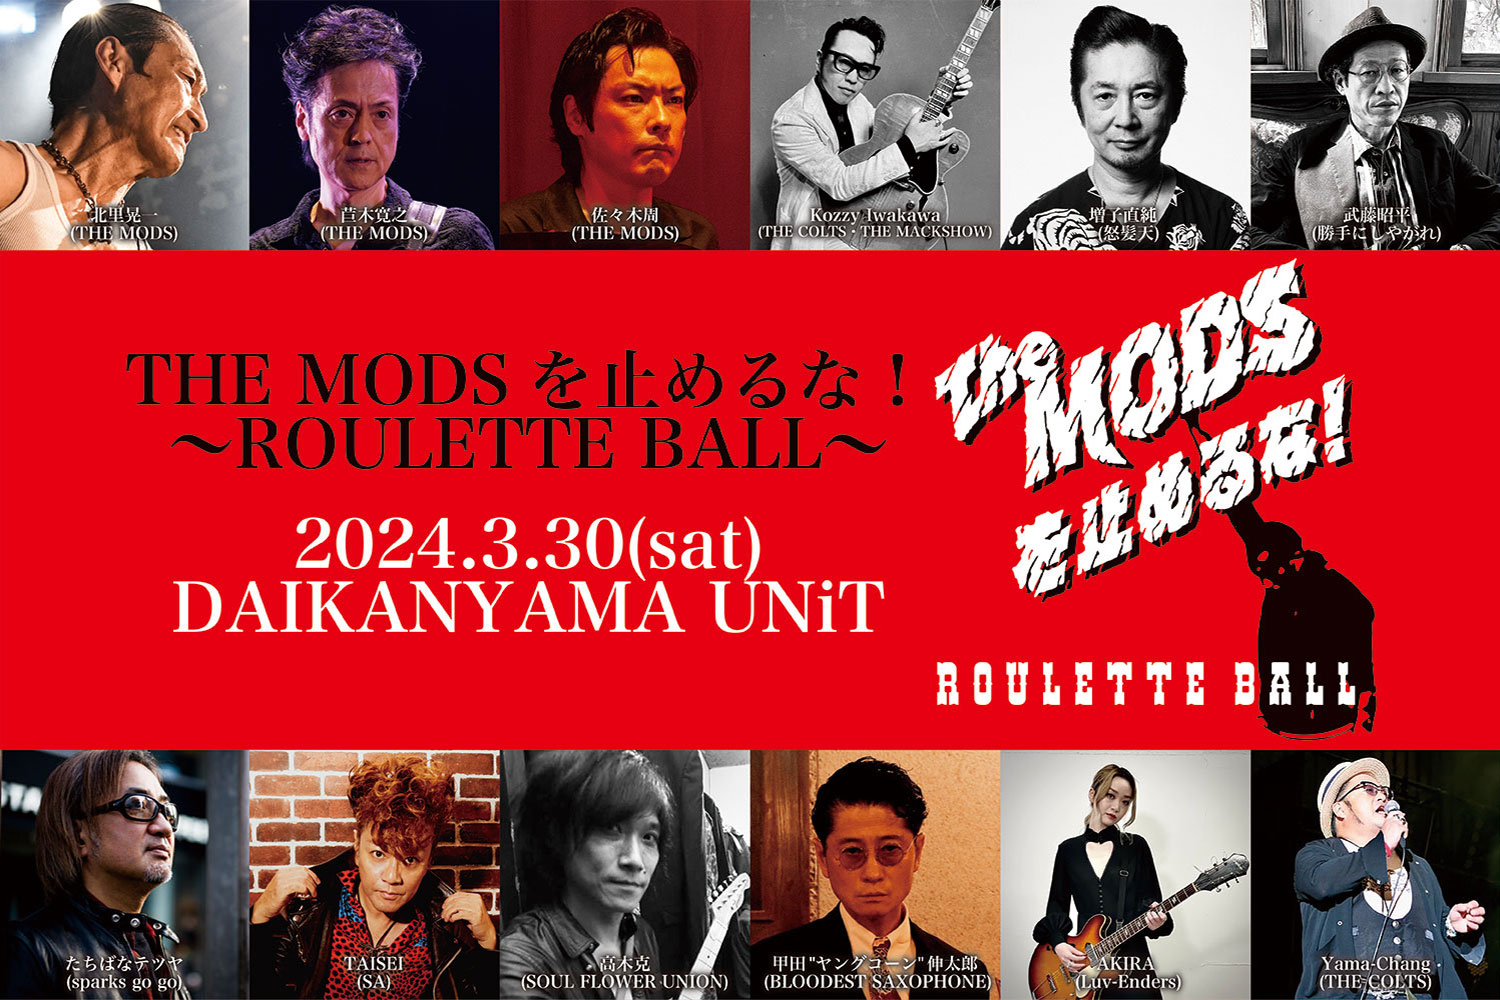 THE MODSを止めるな！〜Roulette Ball〜 ｜ THE MODS OFFICIAL SITE